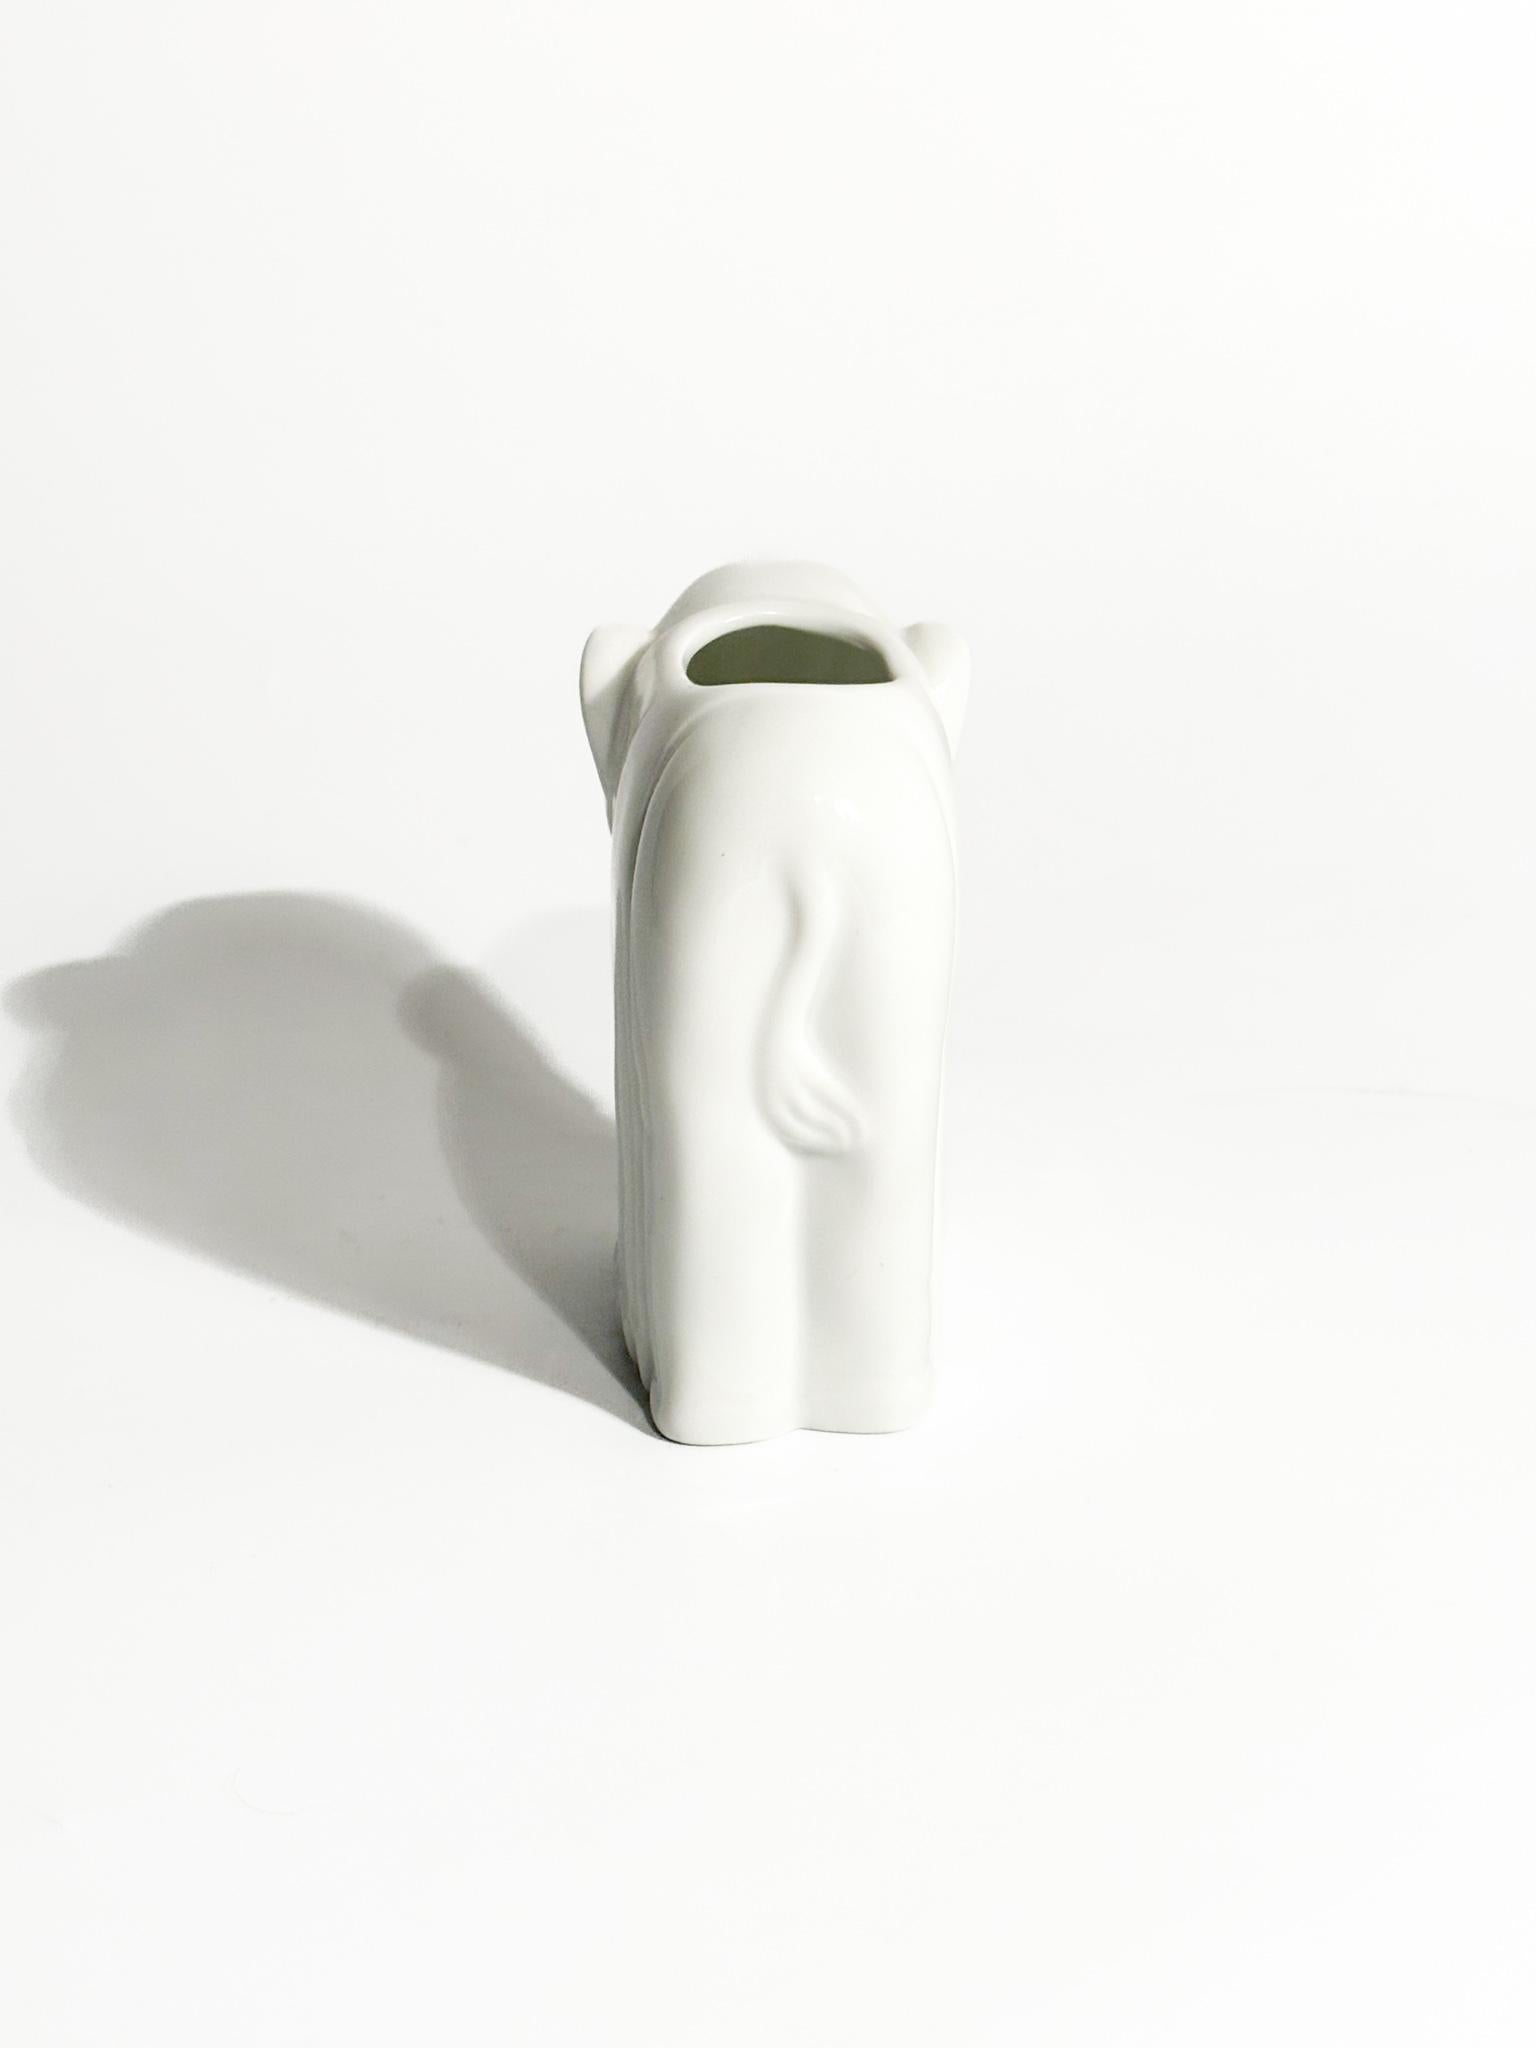 Porcelain White Elephant Vase Re-edition by Gio Ponti for Richard Ginori 1980s For Sale